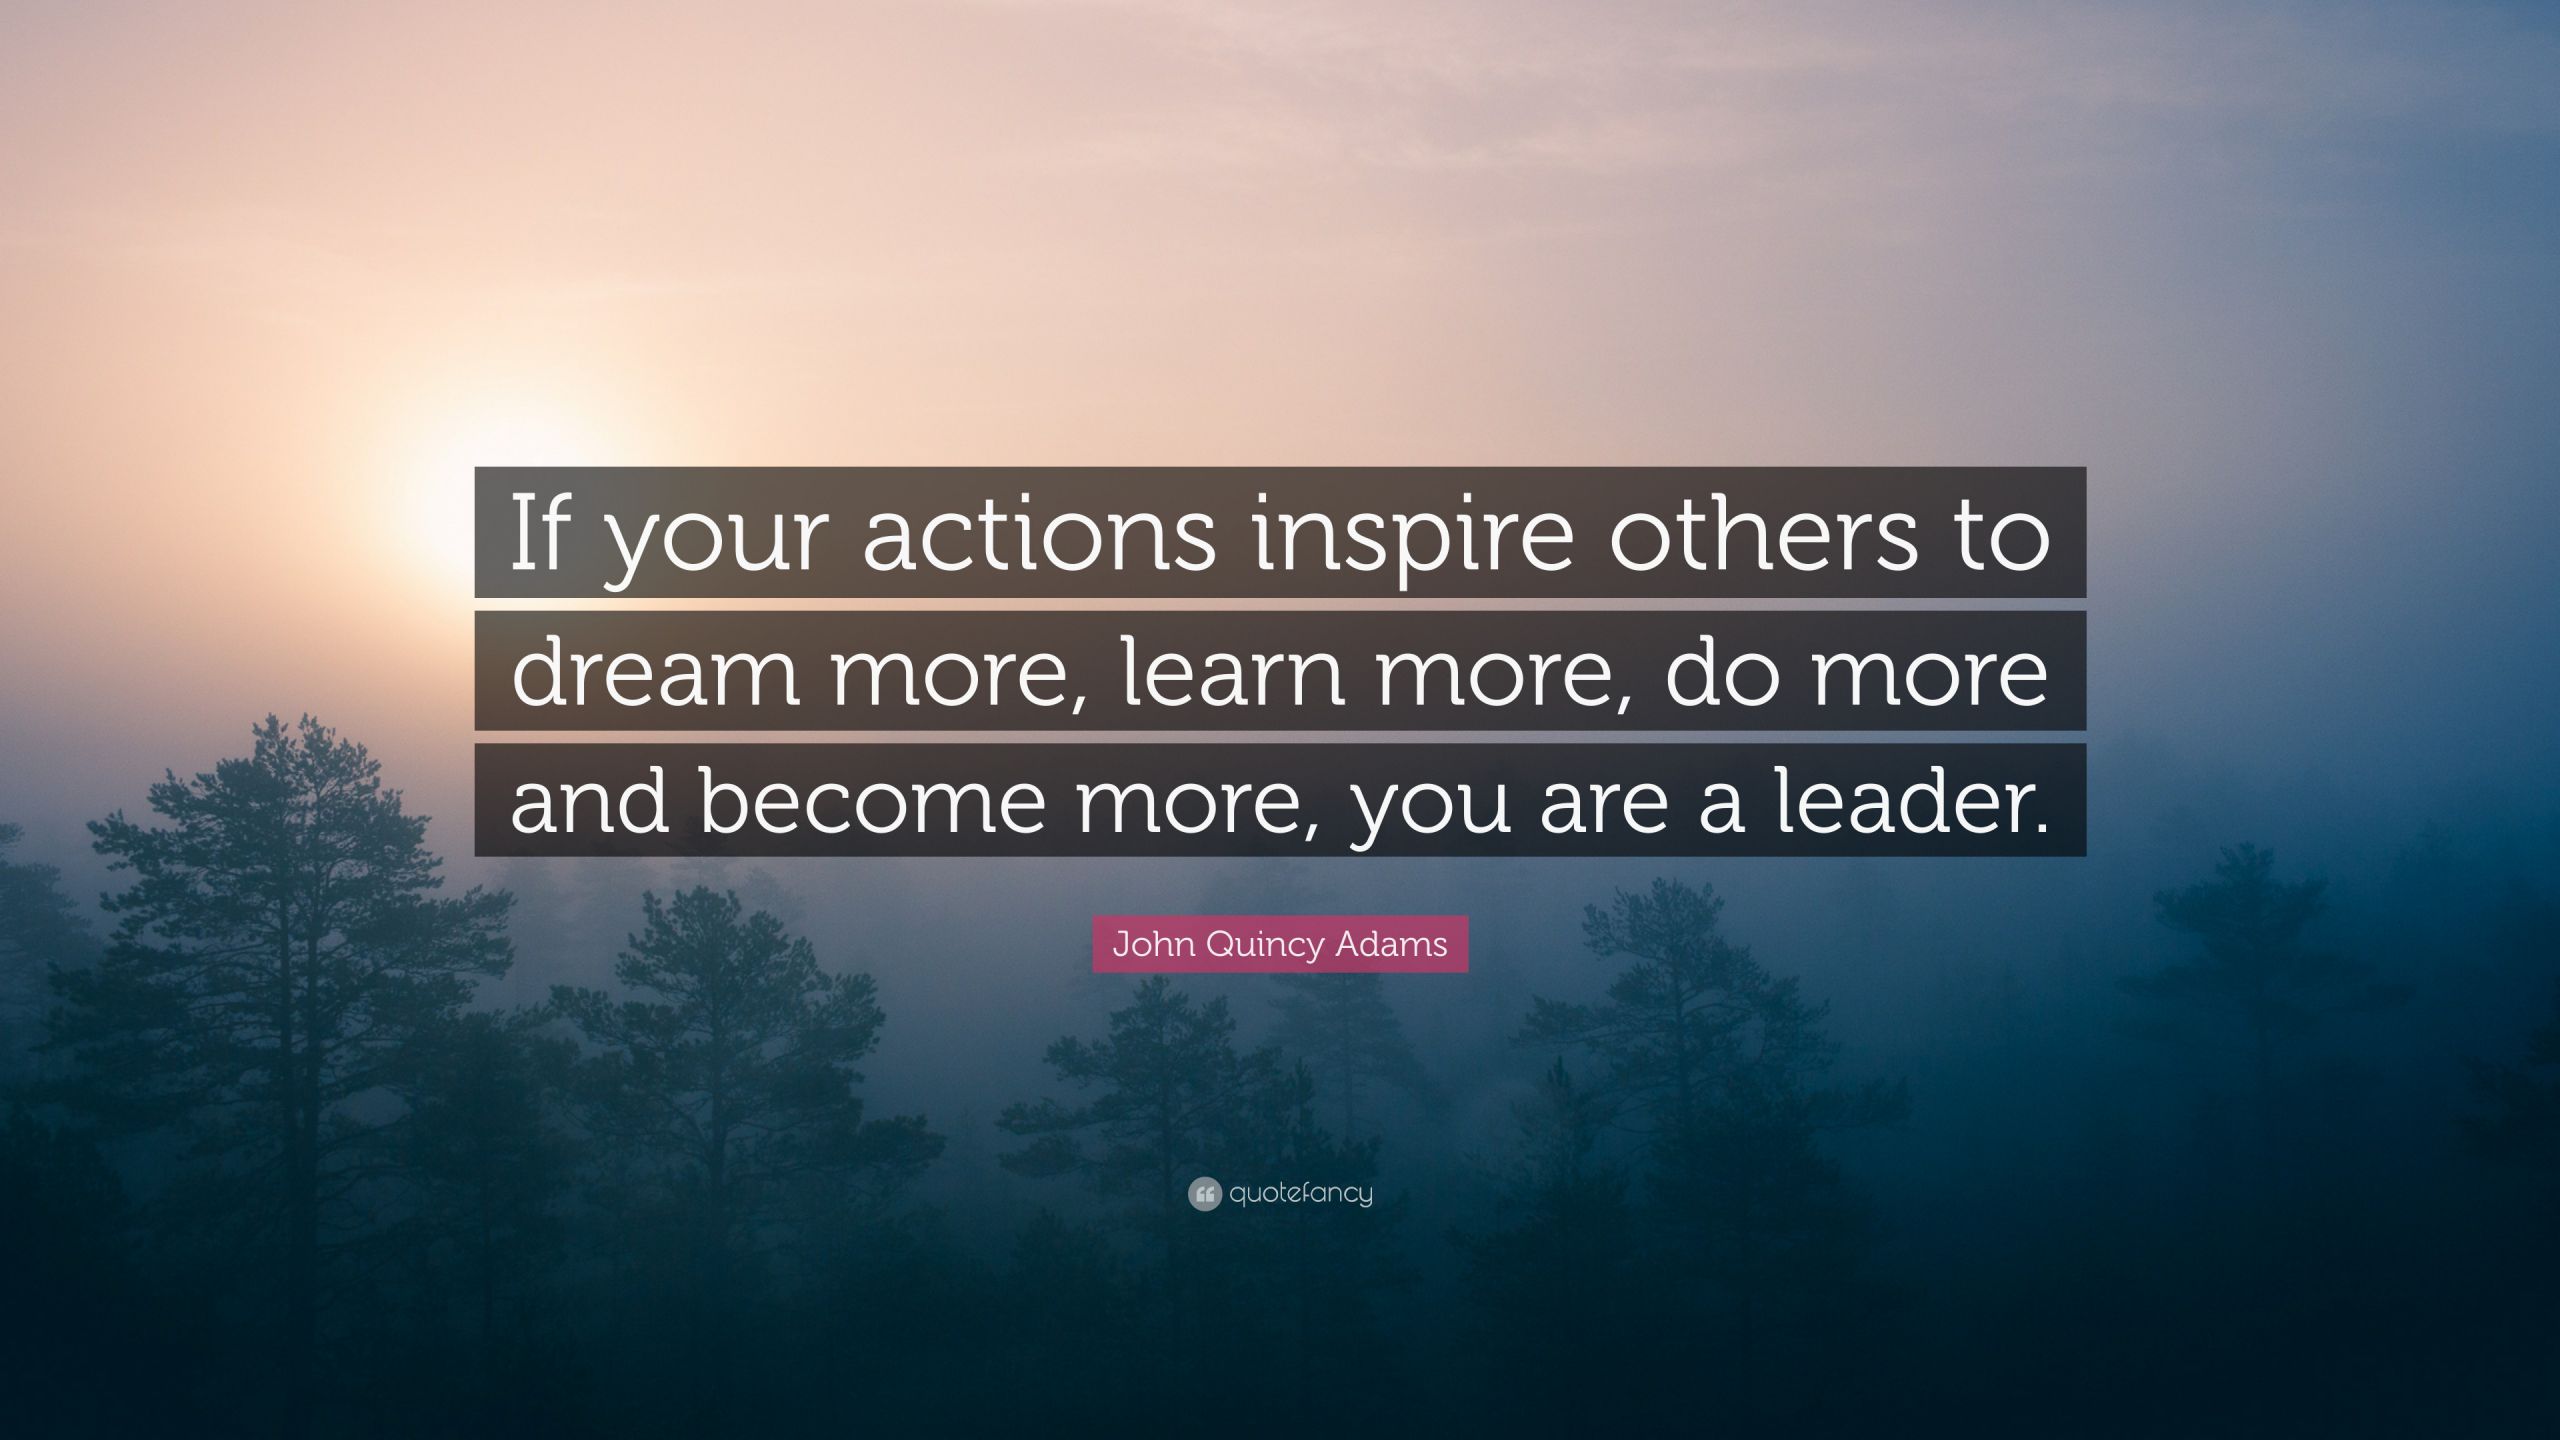 John Quincy Adams Leadership Quote
 John Quincy Adams Quote “If your actions inspire others